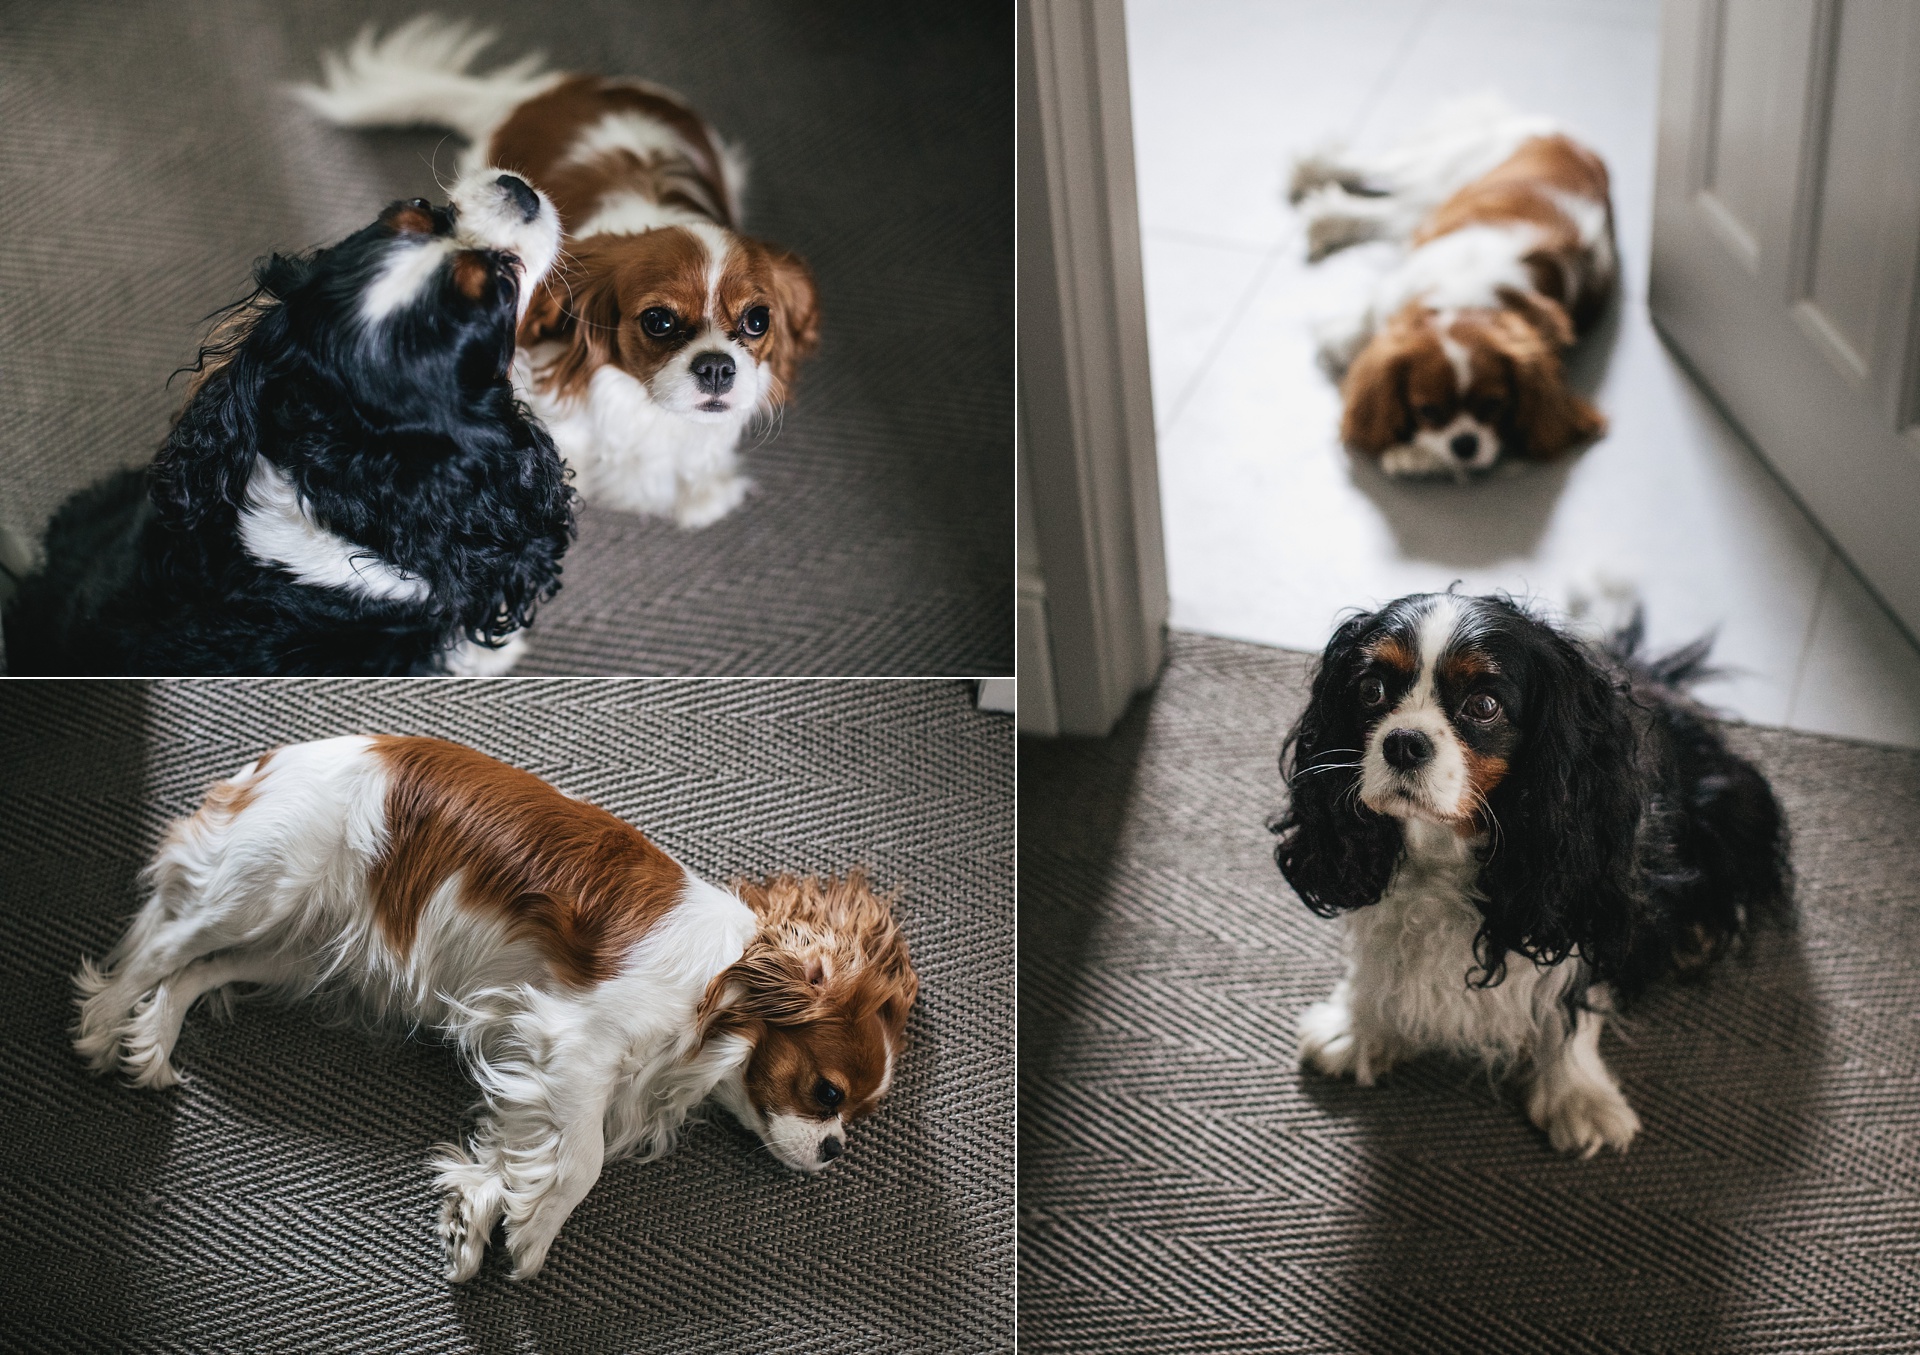 Two King Charles Spaniels